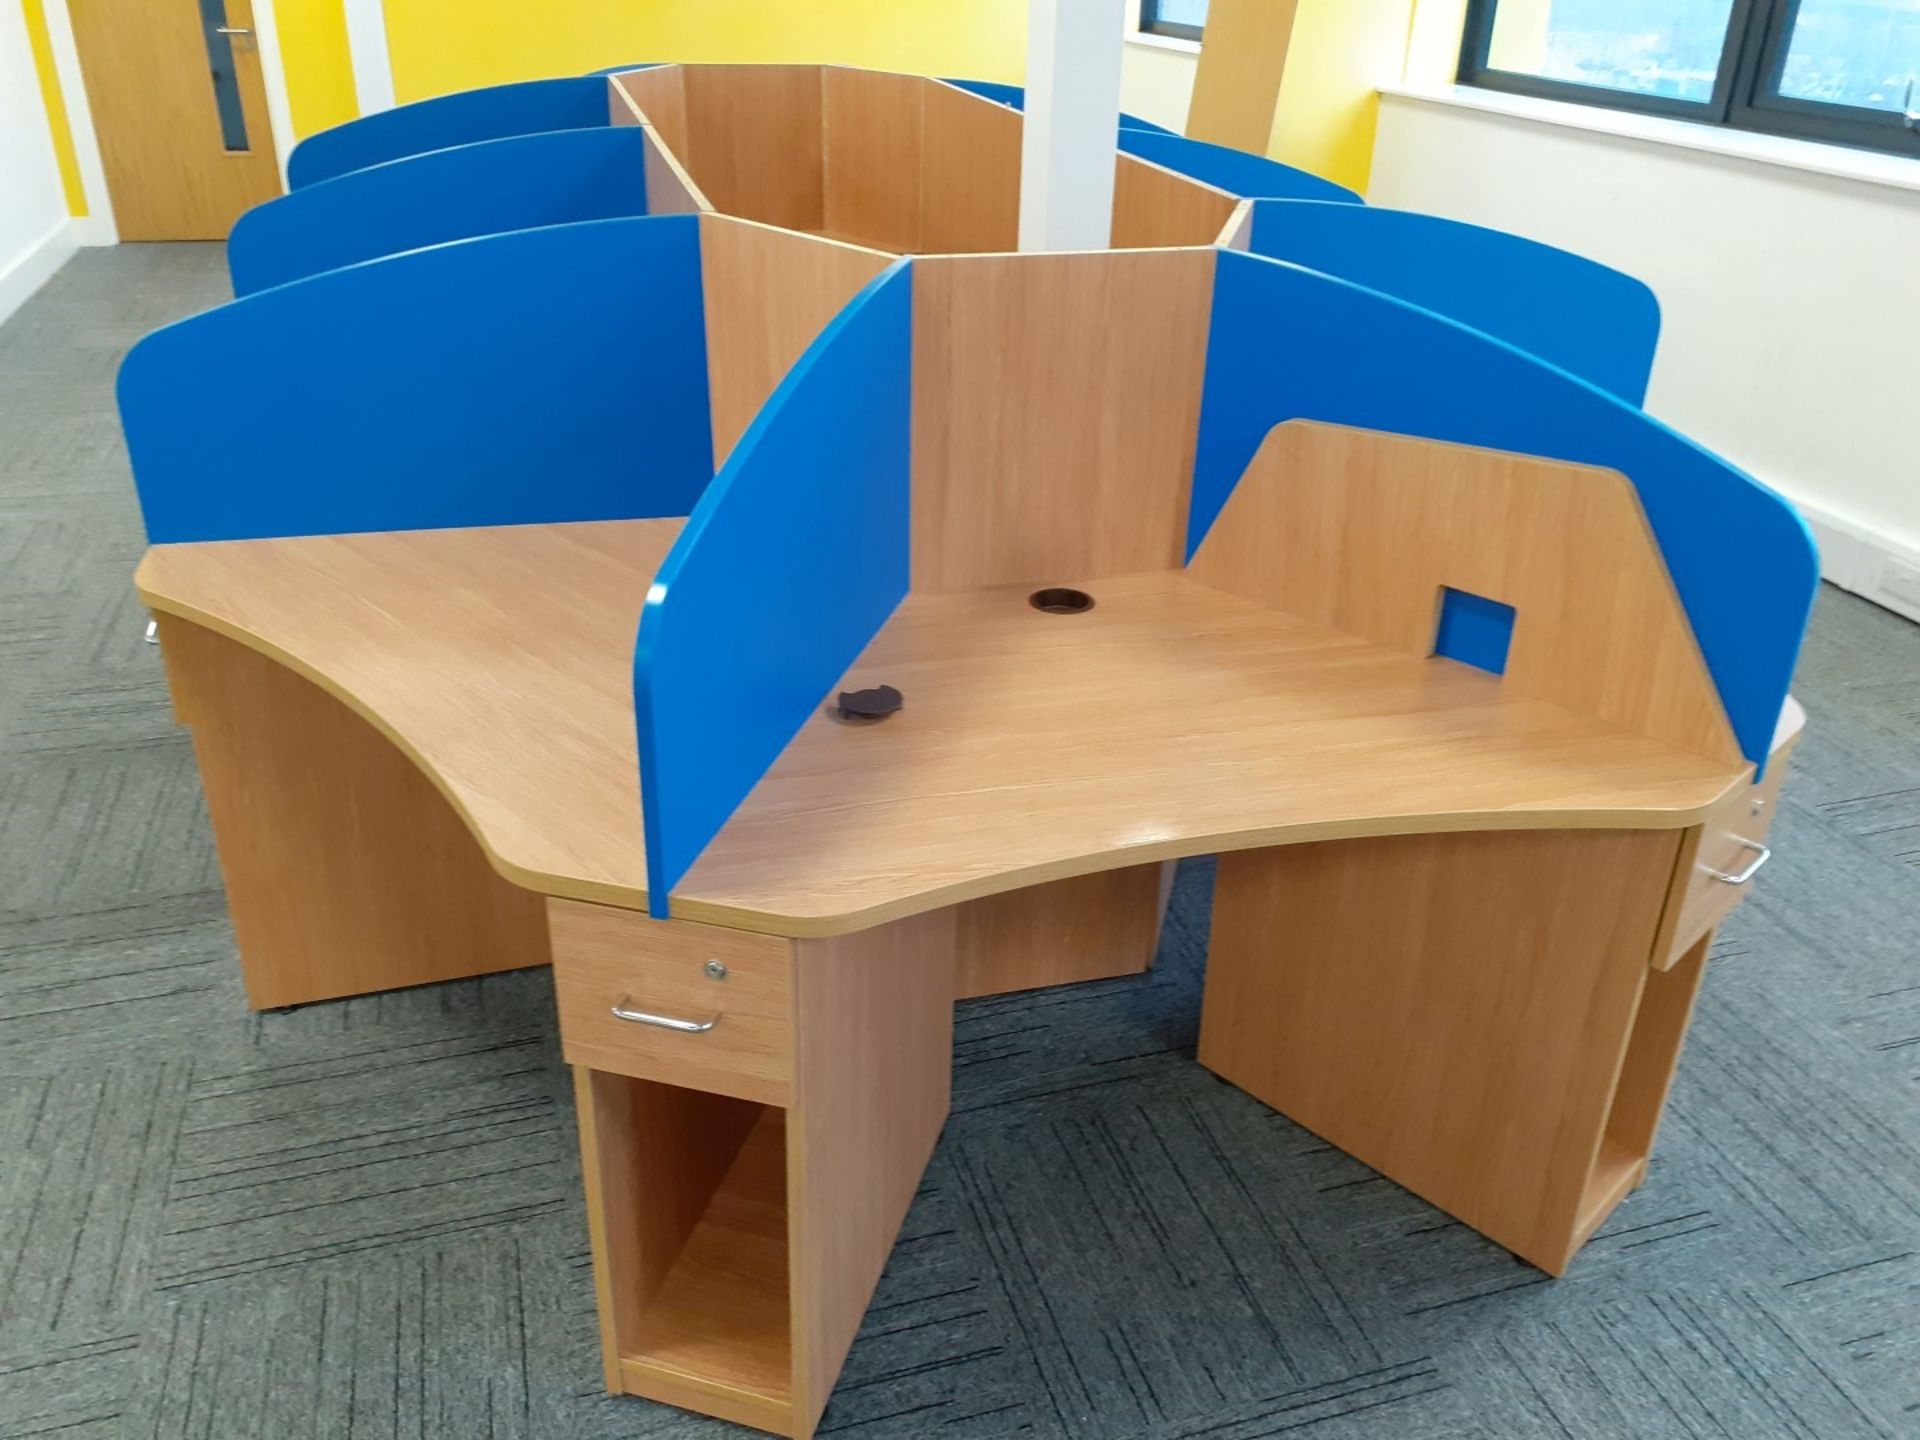 1 x 10-Desk Office Workstation Pod With Privacy Partitions In A Beech Finish - Original RRP £3,987 - Image 2 of 6